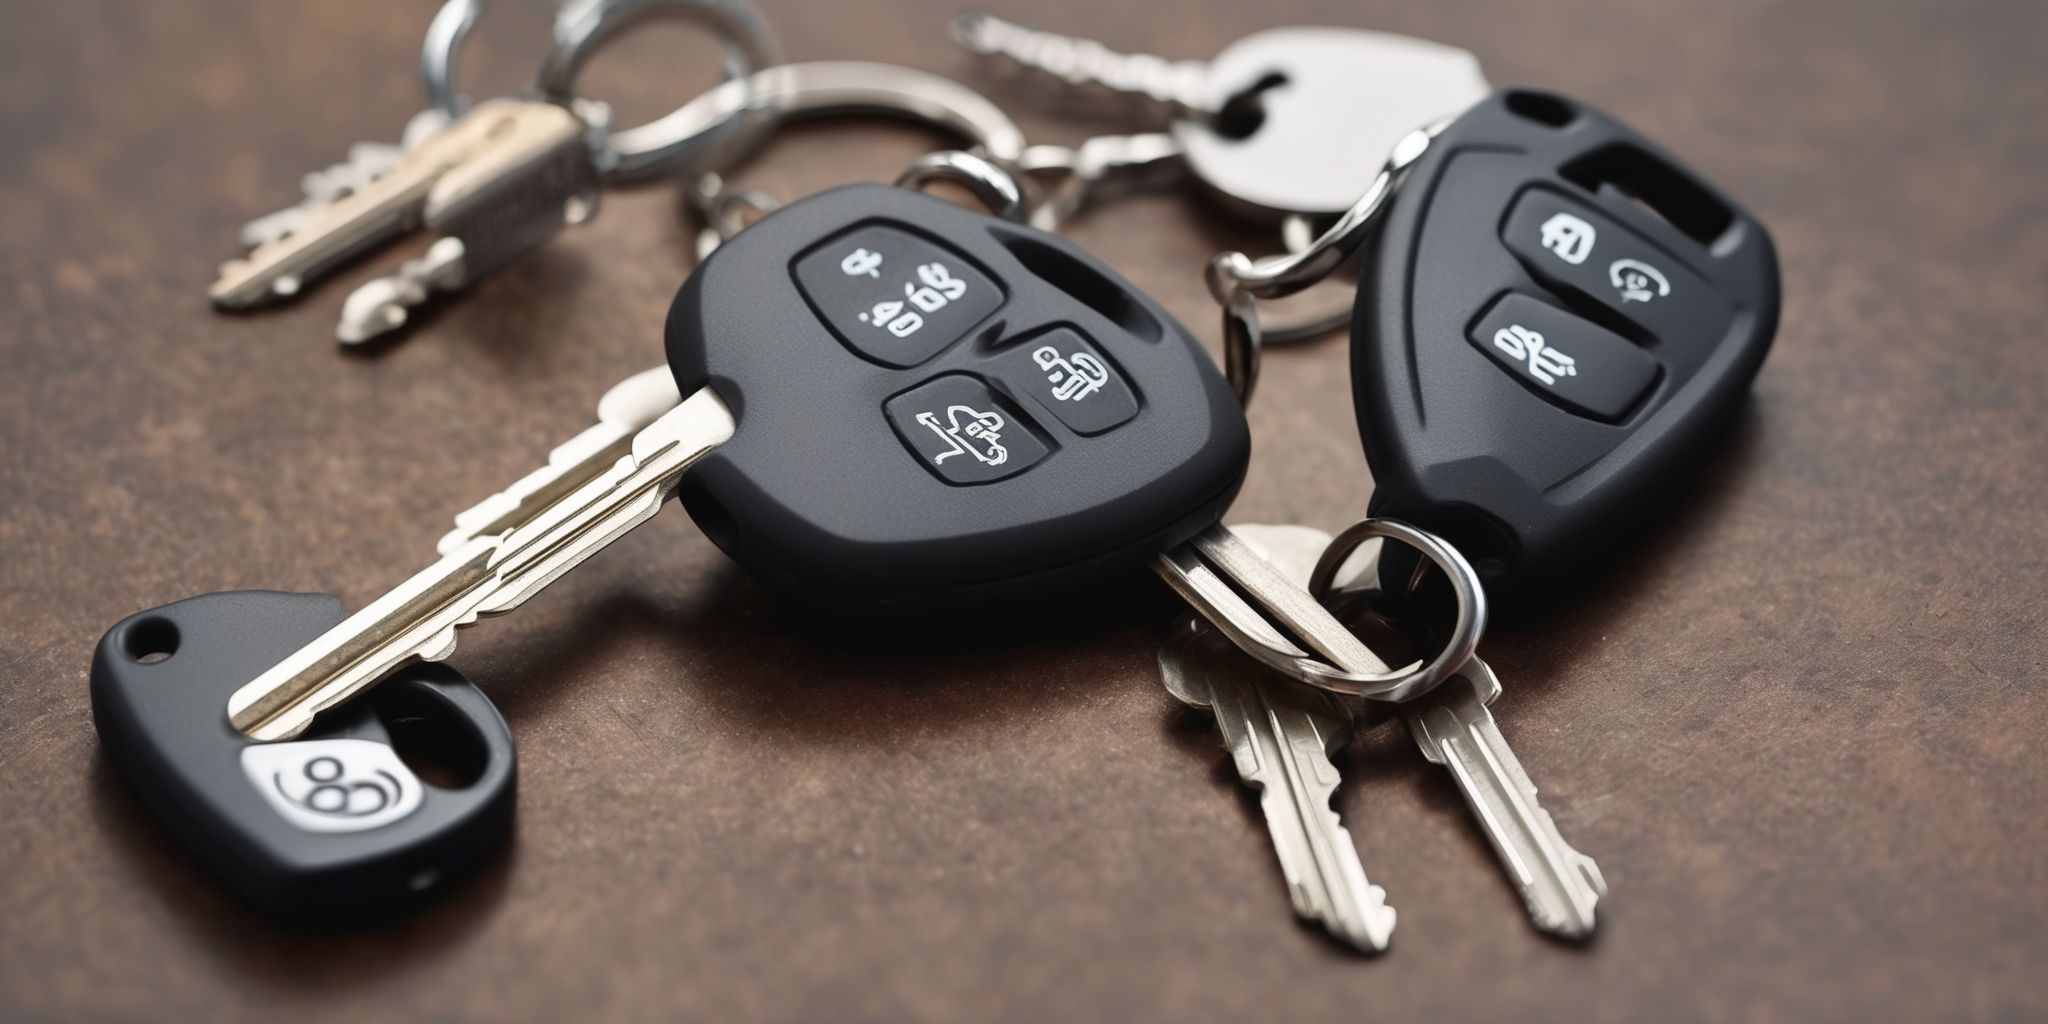 Car keys  in realistic, photographic style